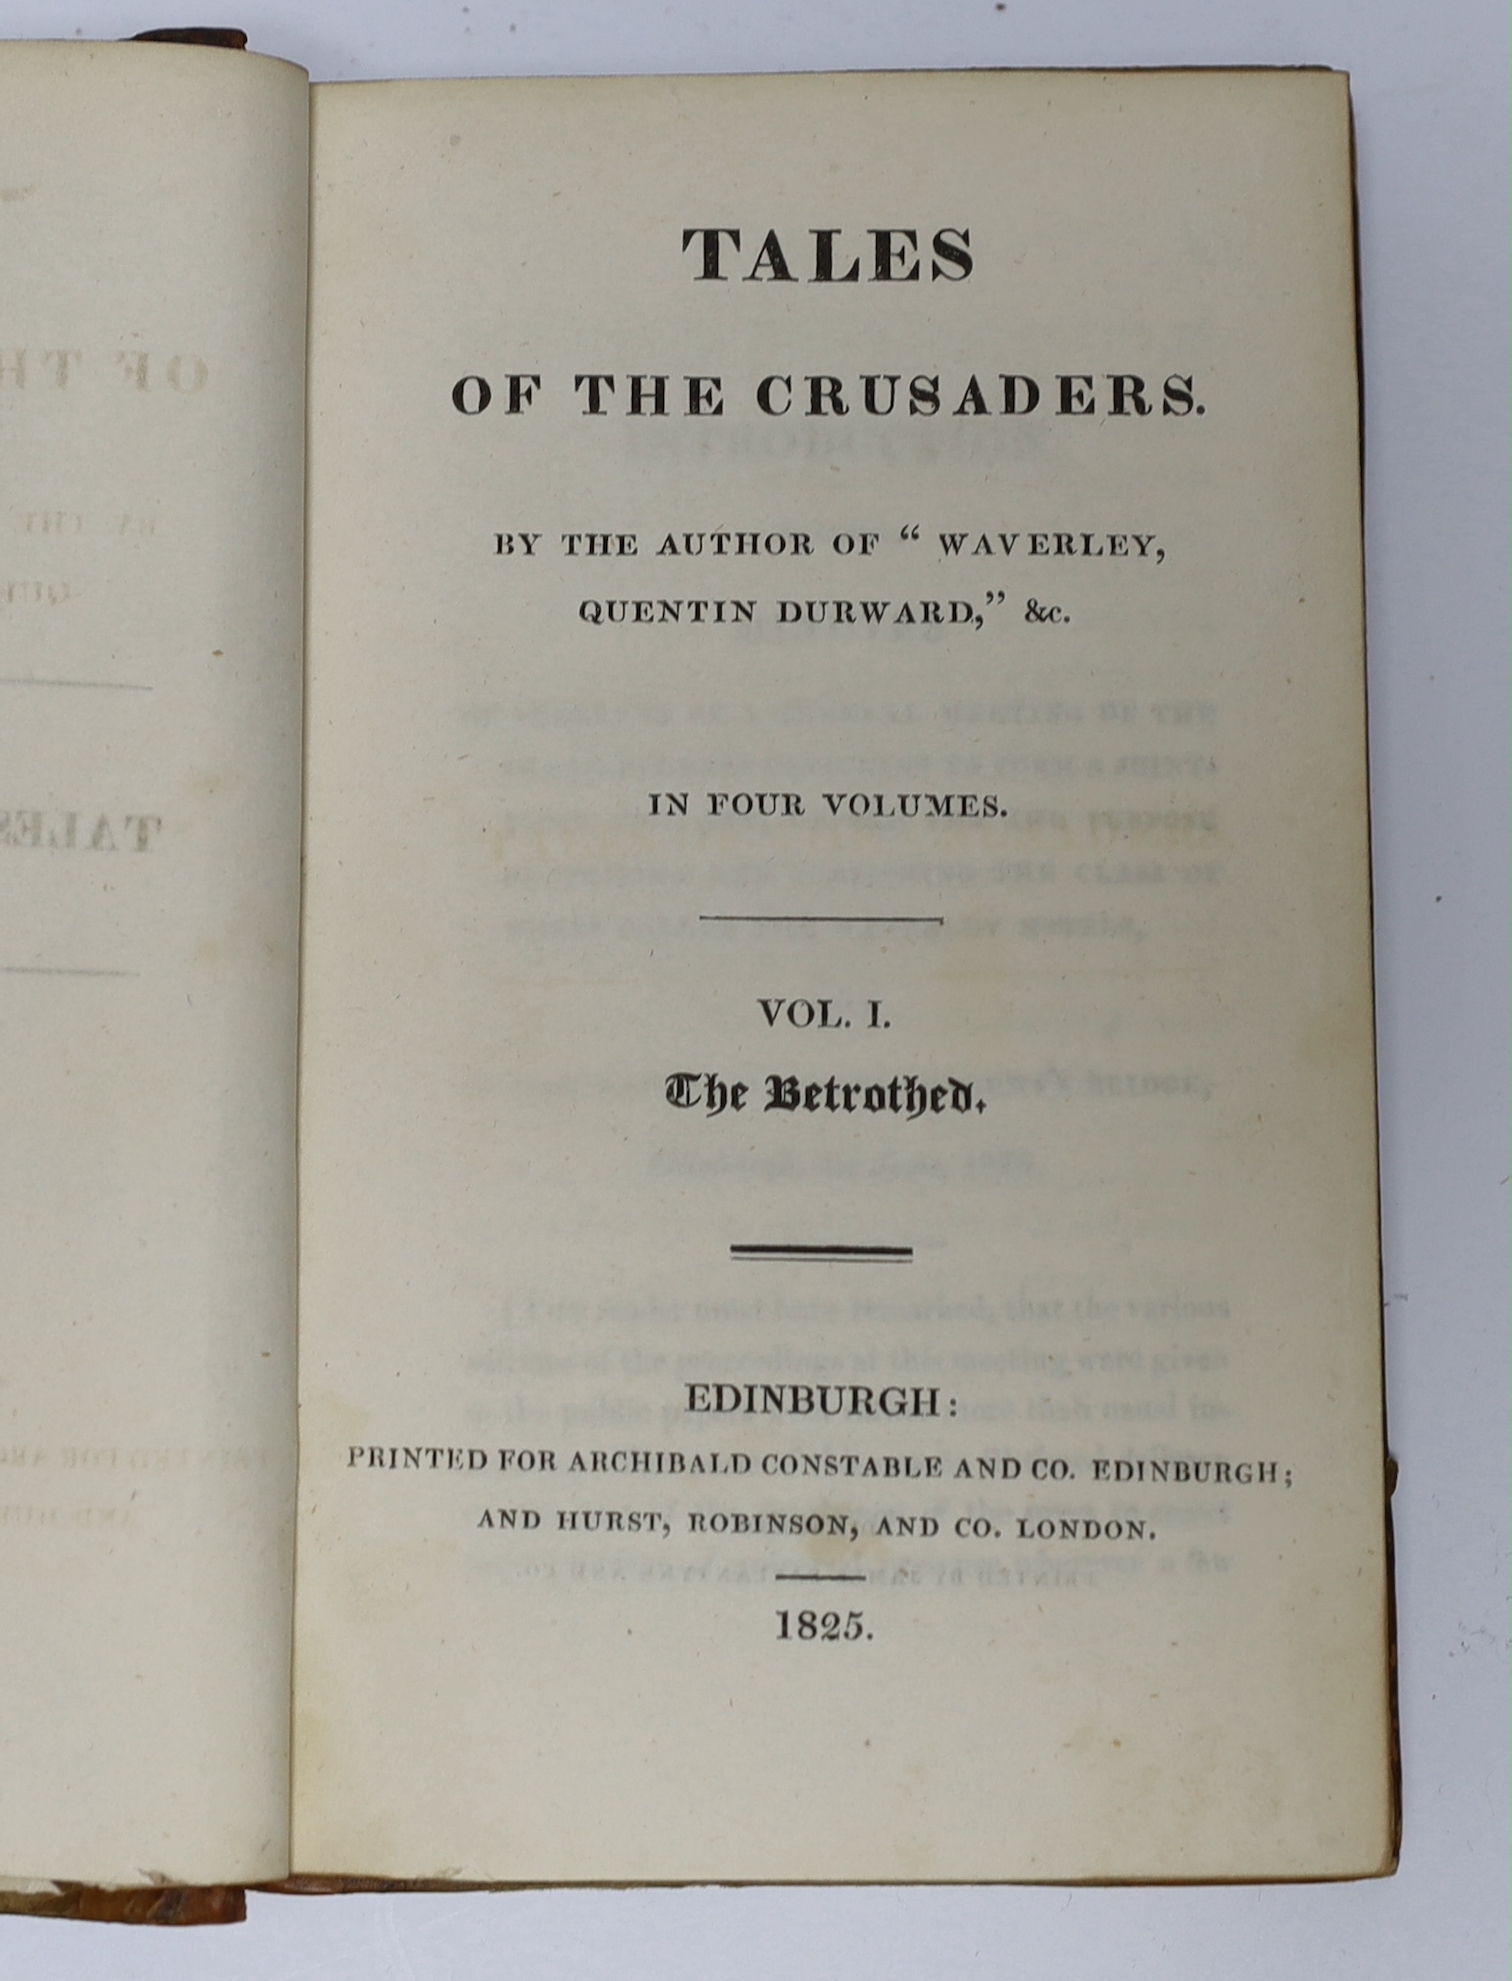 Scott, Sir Walter - Tales of the Crusaders, 1st edition, 4 vols, 8vo, half calf rebacked, half titles to each vol., 4p. publisher’s catalogue at end of vol. 4, Archibald Constable, Edinburgh, 1825